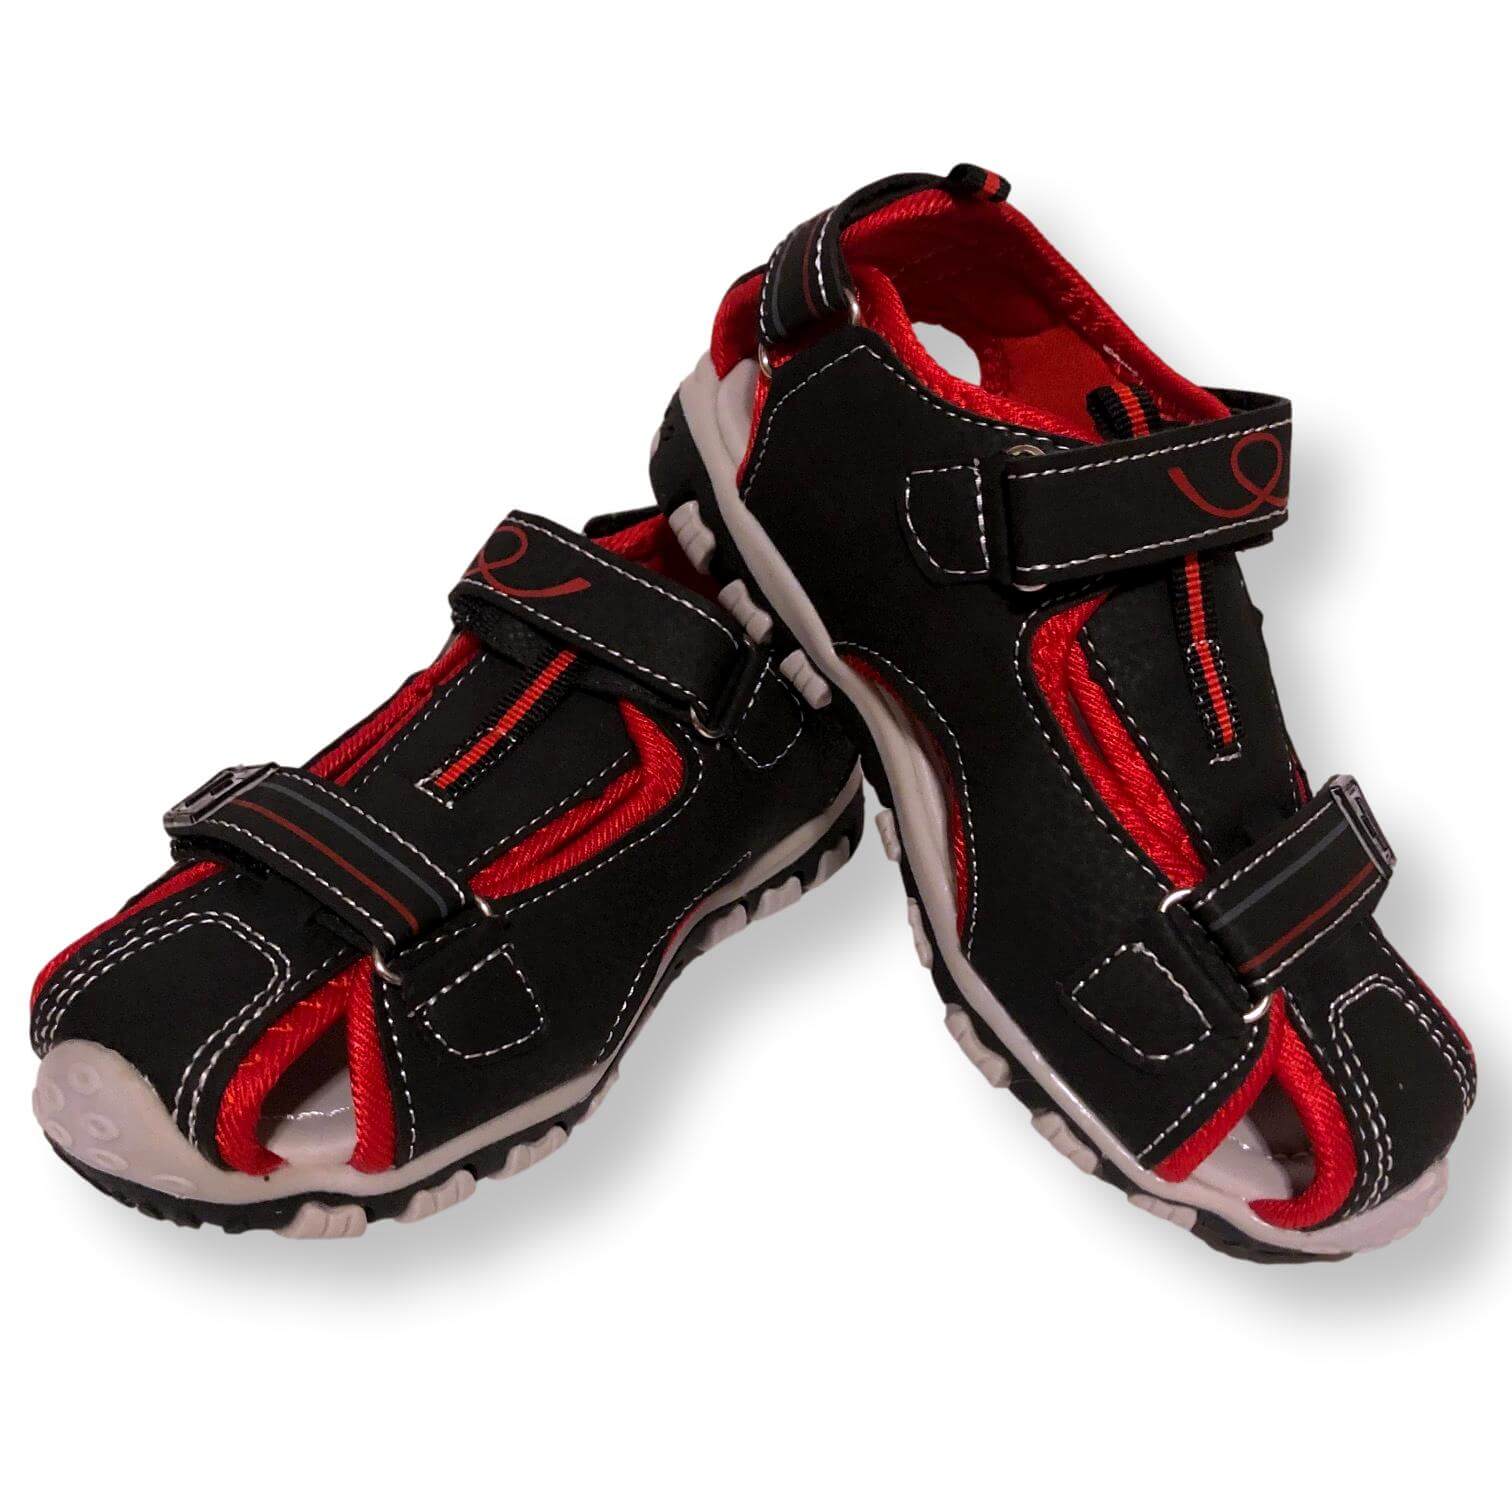 Boys Sandals Velcro Shoes Toddler and Little Kids Closed Toe Sandal, Black Red and Brown Orange, Size 9-13 - FPI Ventures